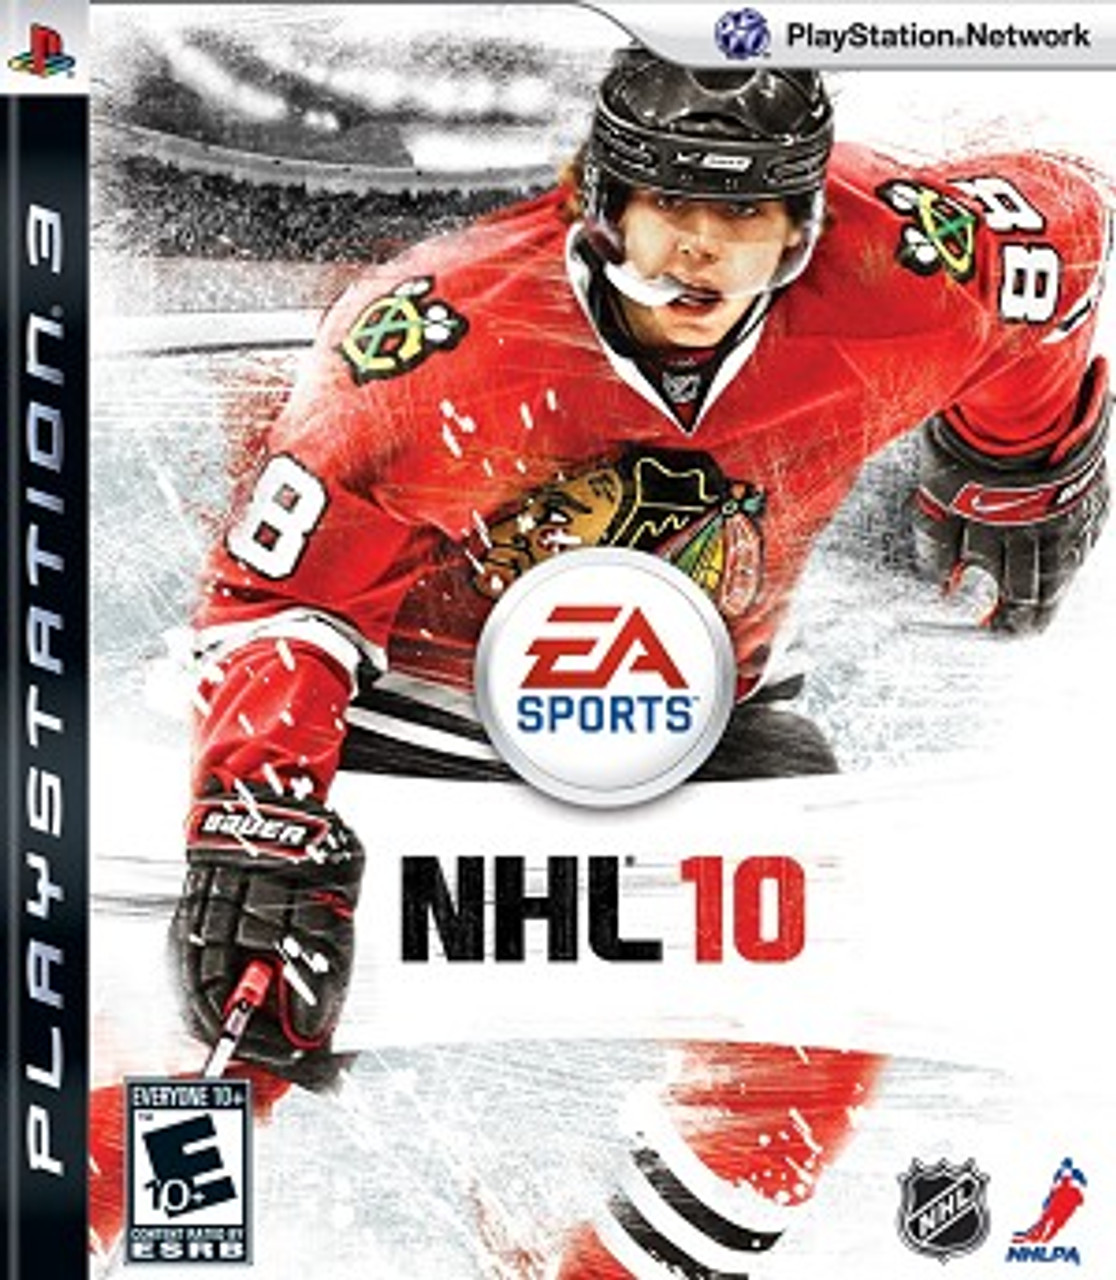 NHL 10 PS3 Game For Sale DKOldies